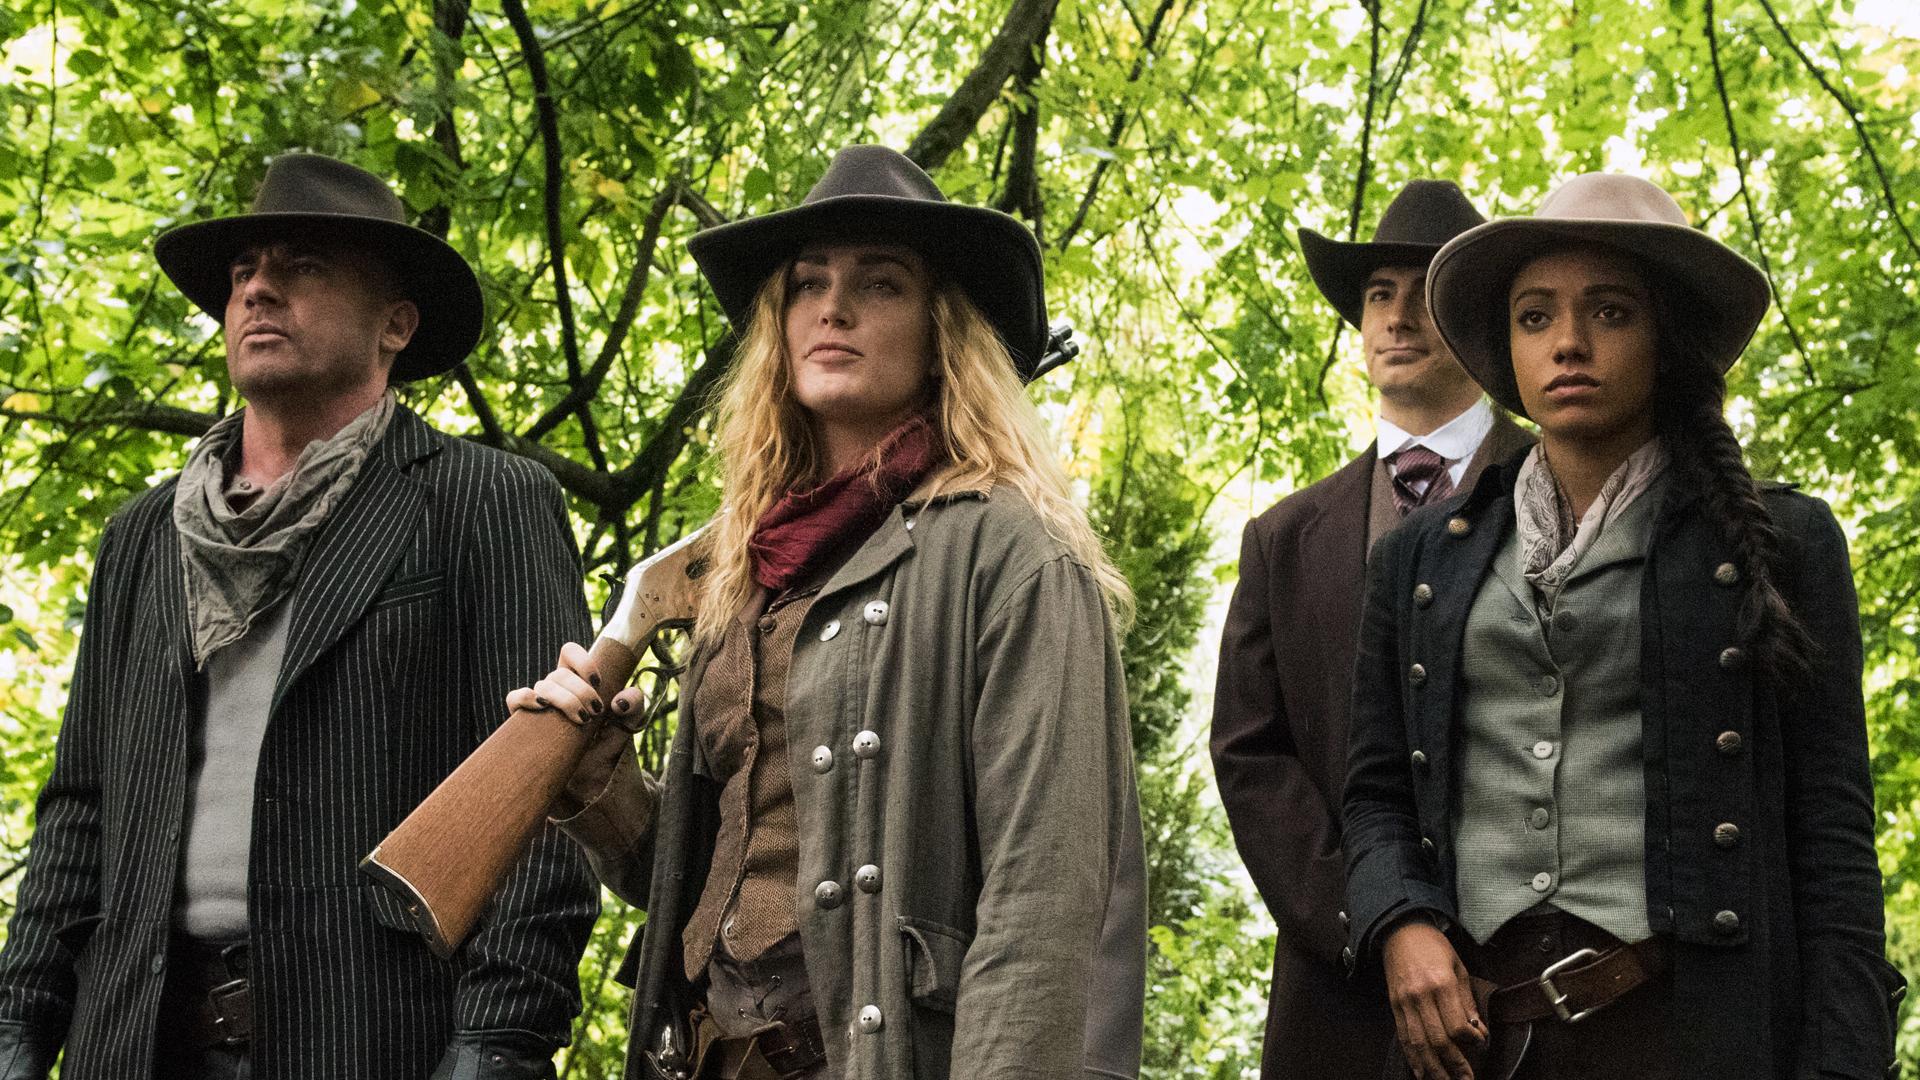 DC's Legends of Tomorrow Video - Outlaw Country | Watch Online Free1920 x 1080